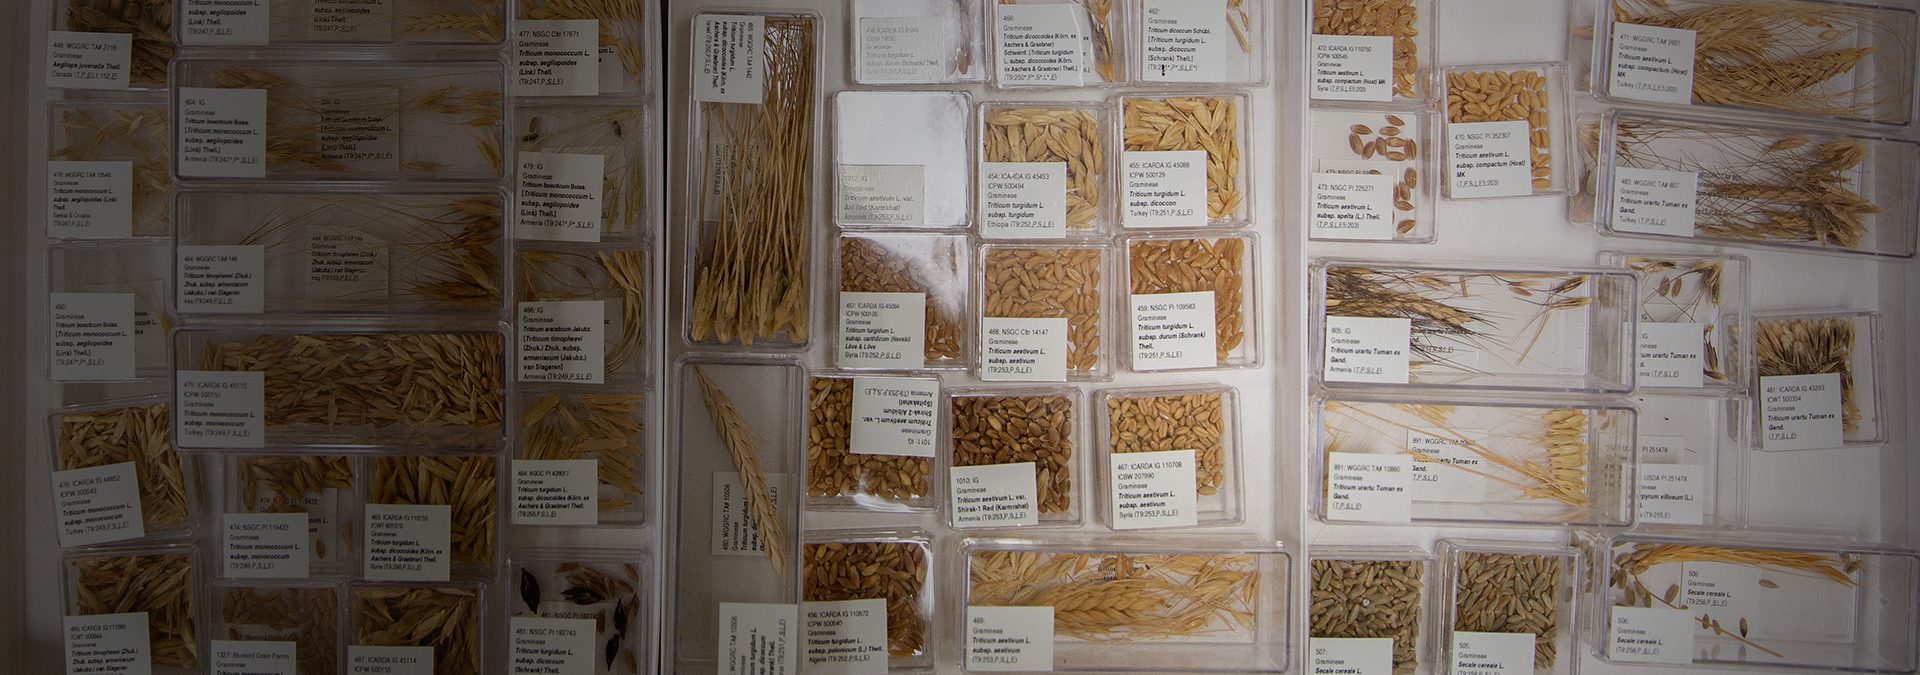 Archive collection of seeds from an anthropology laboratory.